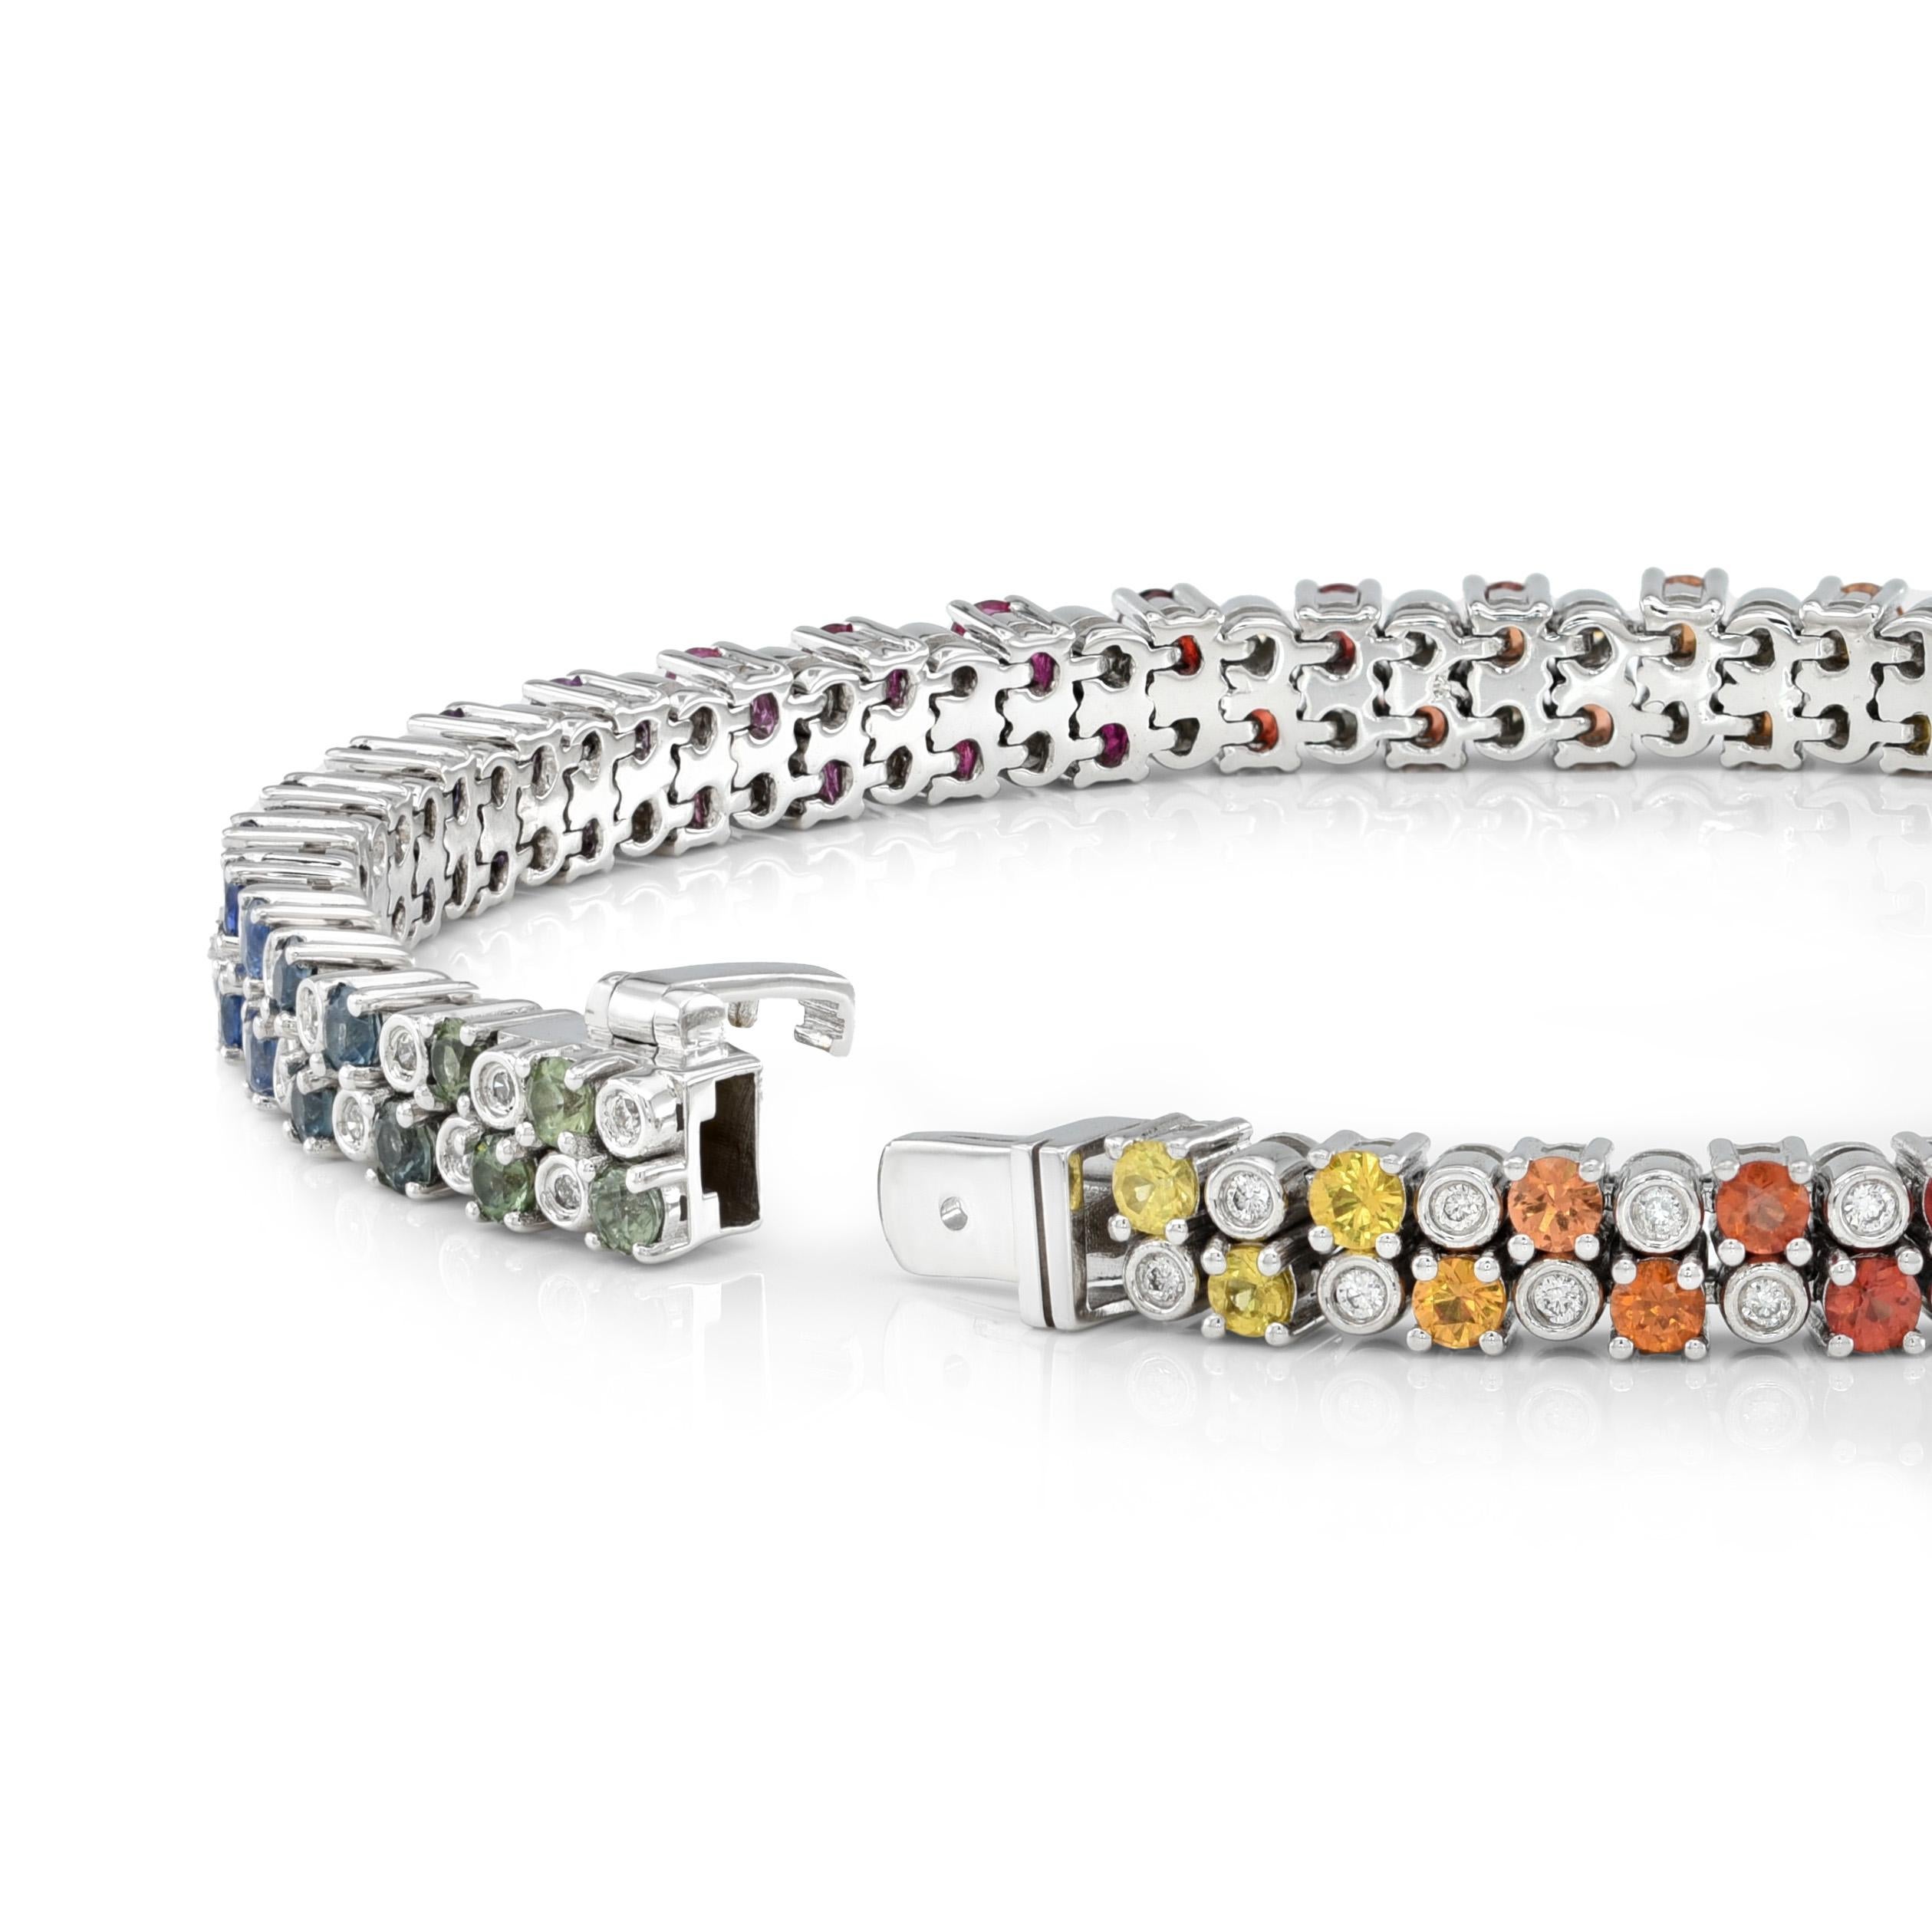 Indulge in the captivating allure of our Natural Rainbow Multi Color Sapphires and Diamonds bracelet. Featuring 3.04 carats of mesmerizing gemstones and 0.43 carats of dazzling diamonds, meticulously set in an 18K white gold bracelet. The exquisite